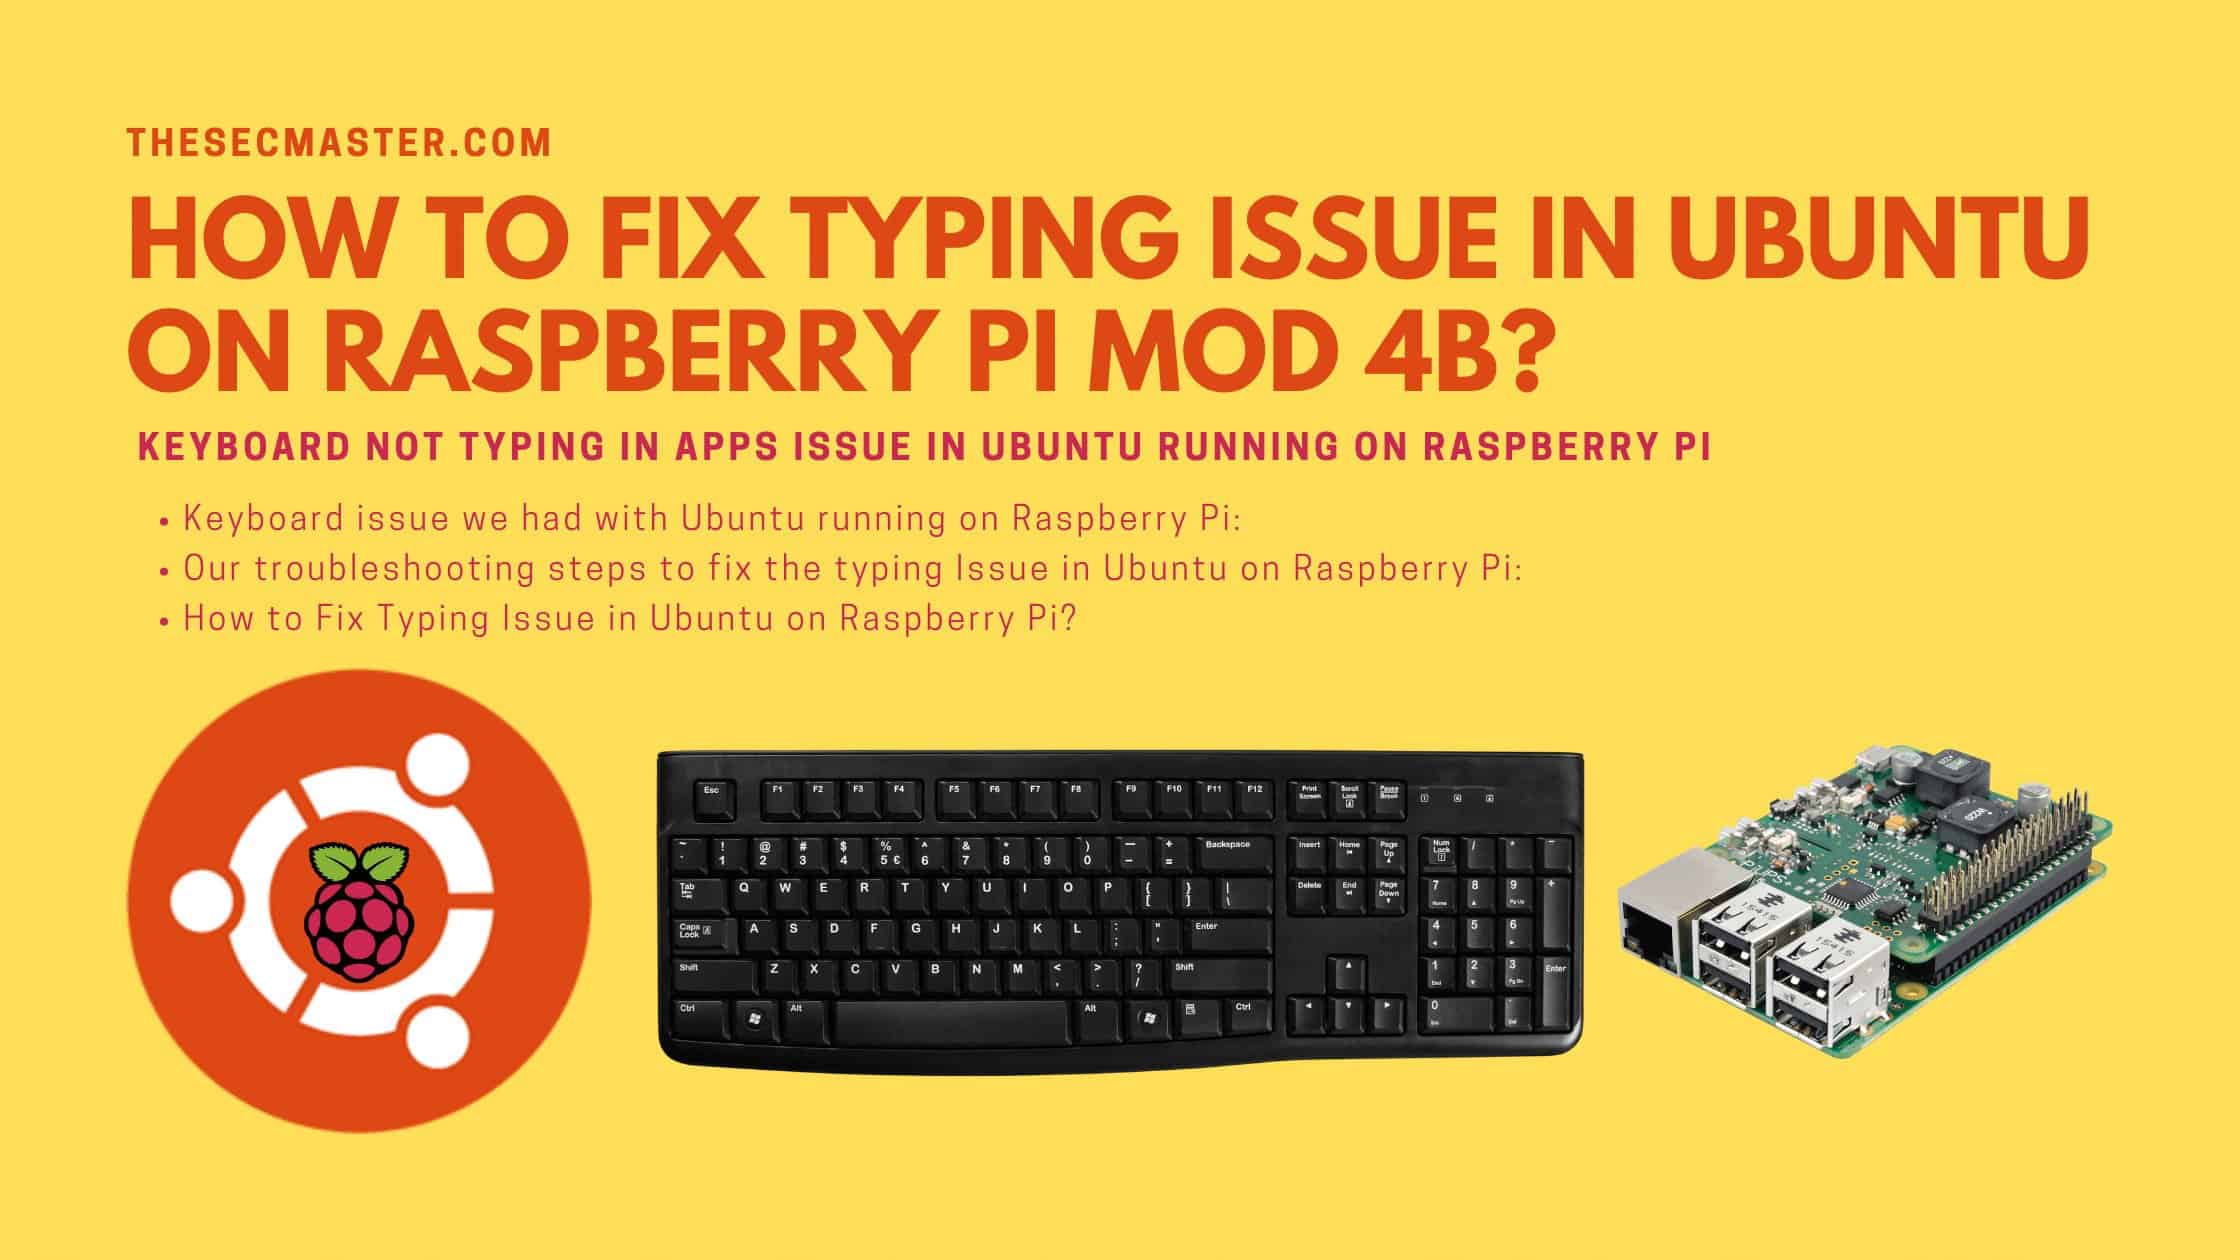 How To Fix Typing Issue In Ubuntu On Raspberry Pi